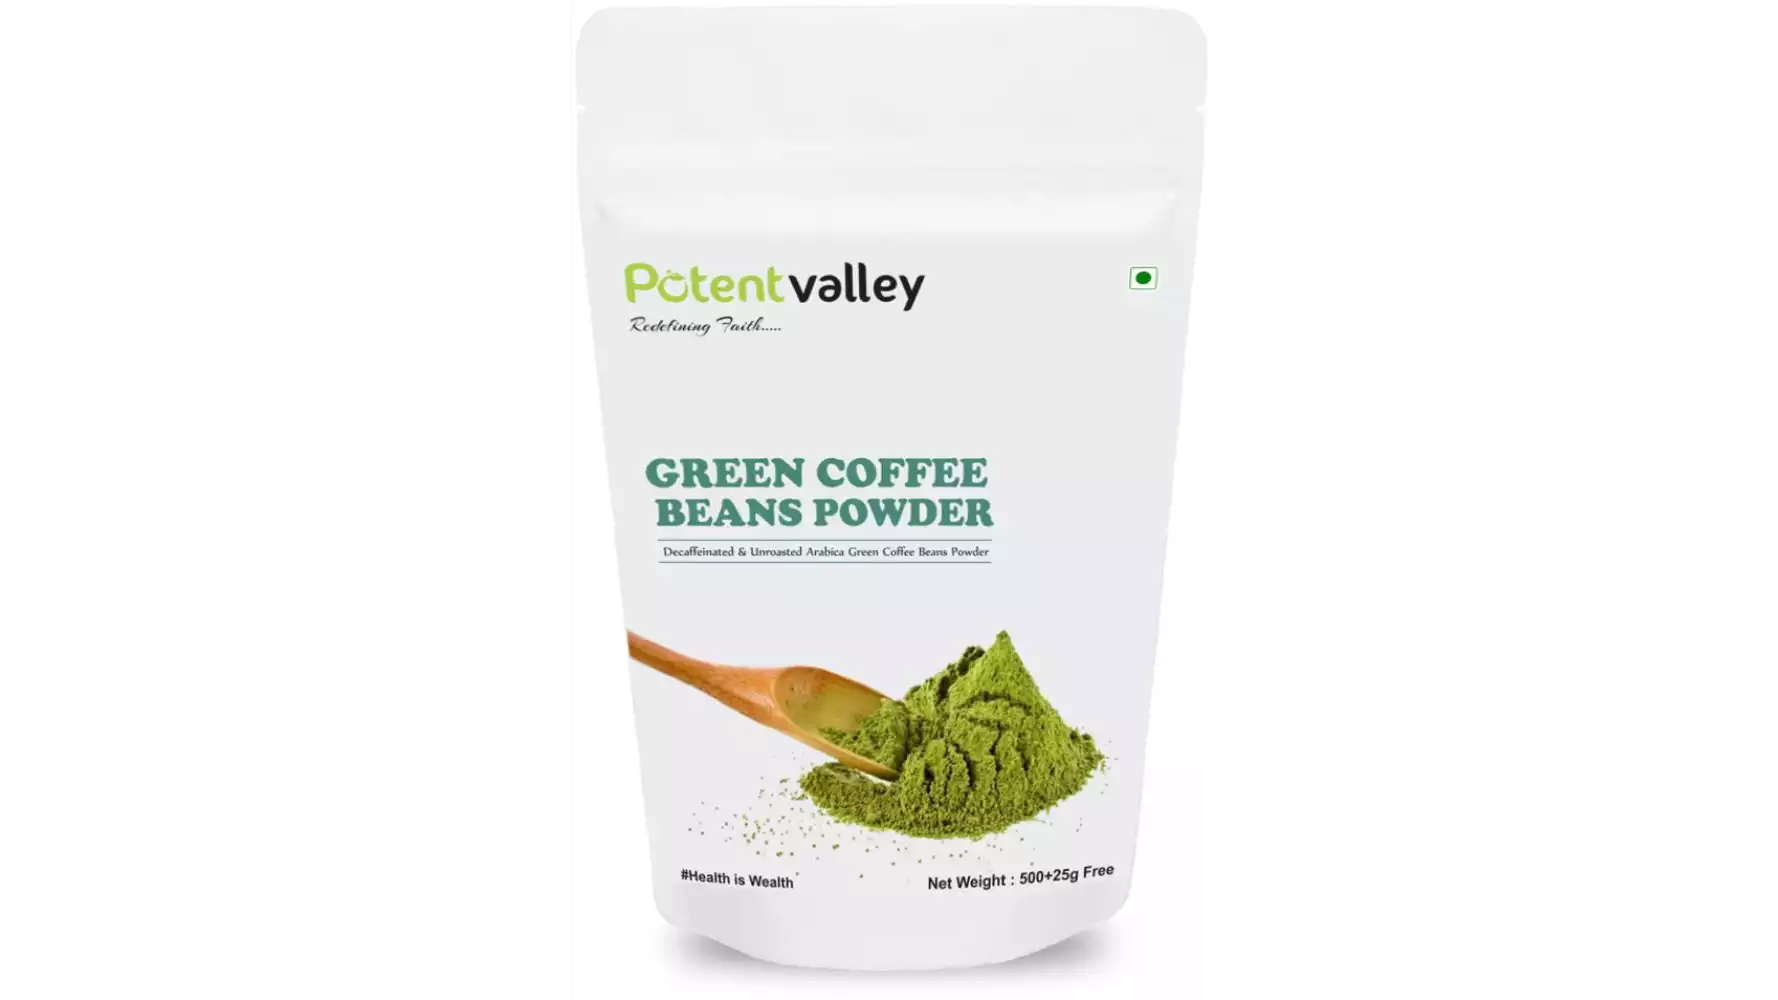 Potentvalley Decaffeinated Arabica Unroasted Green Coffee Beans (500g)